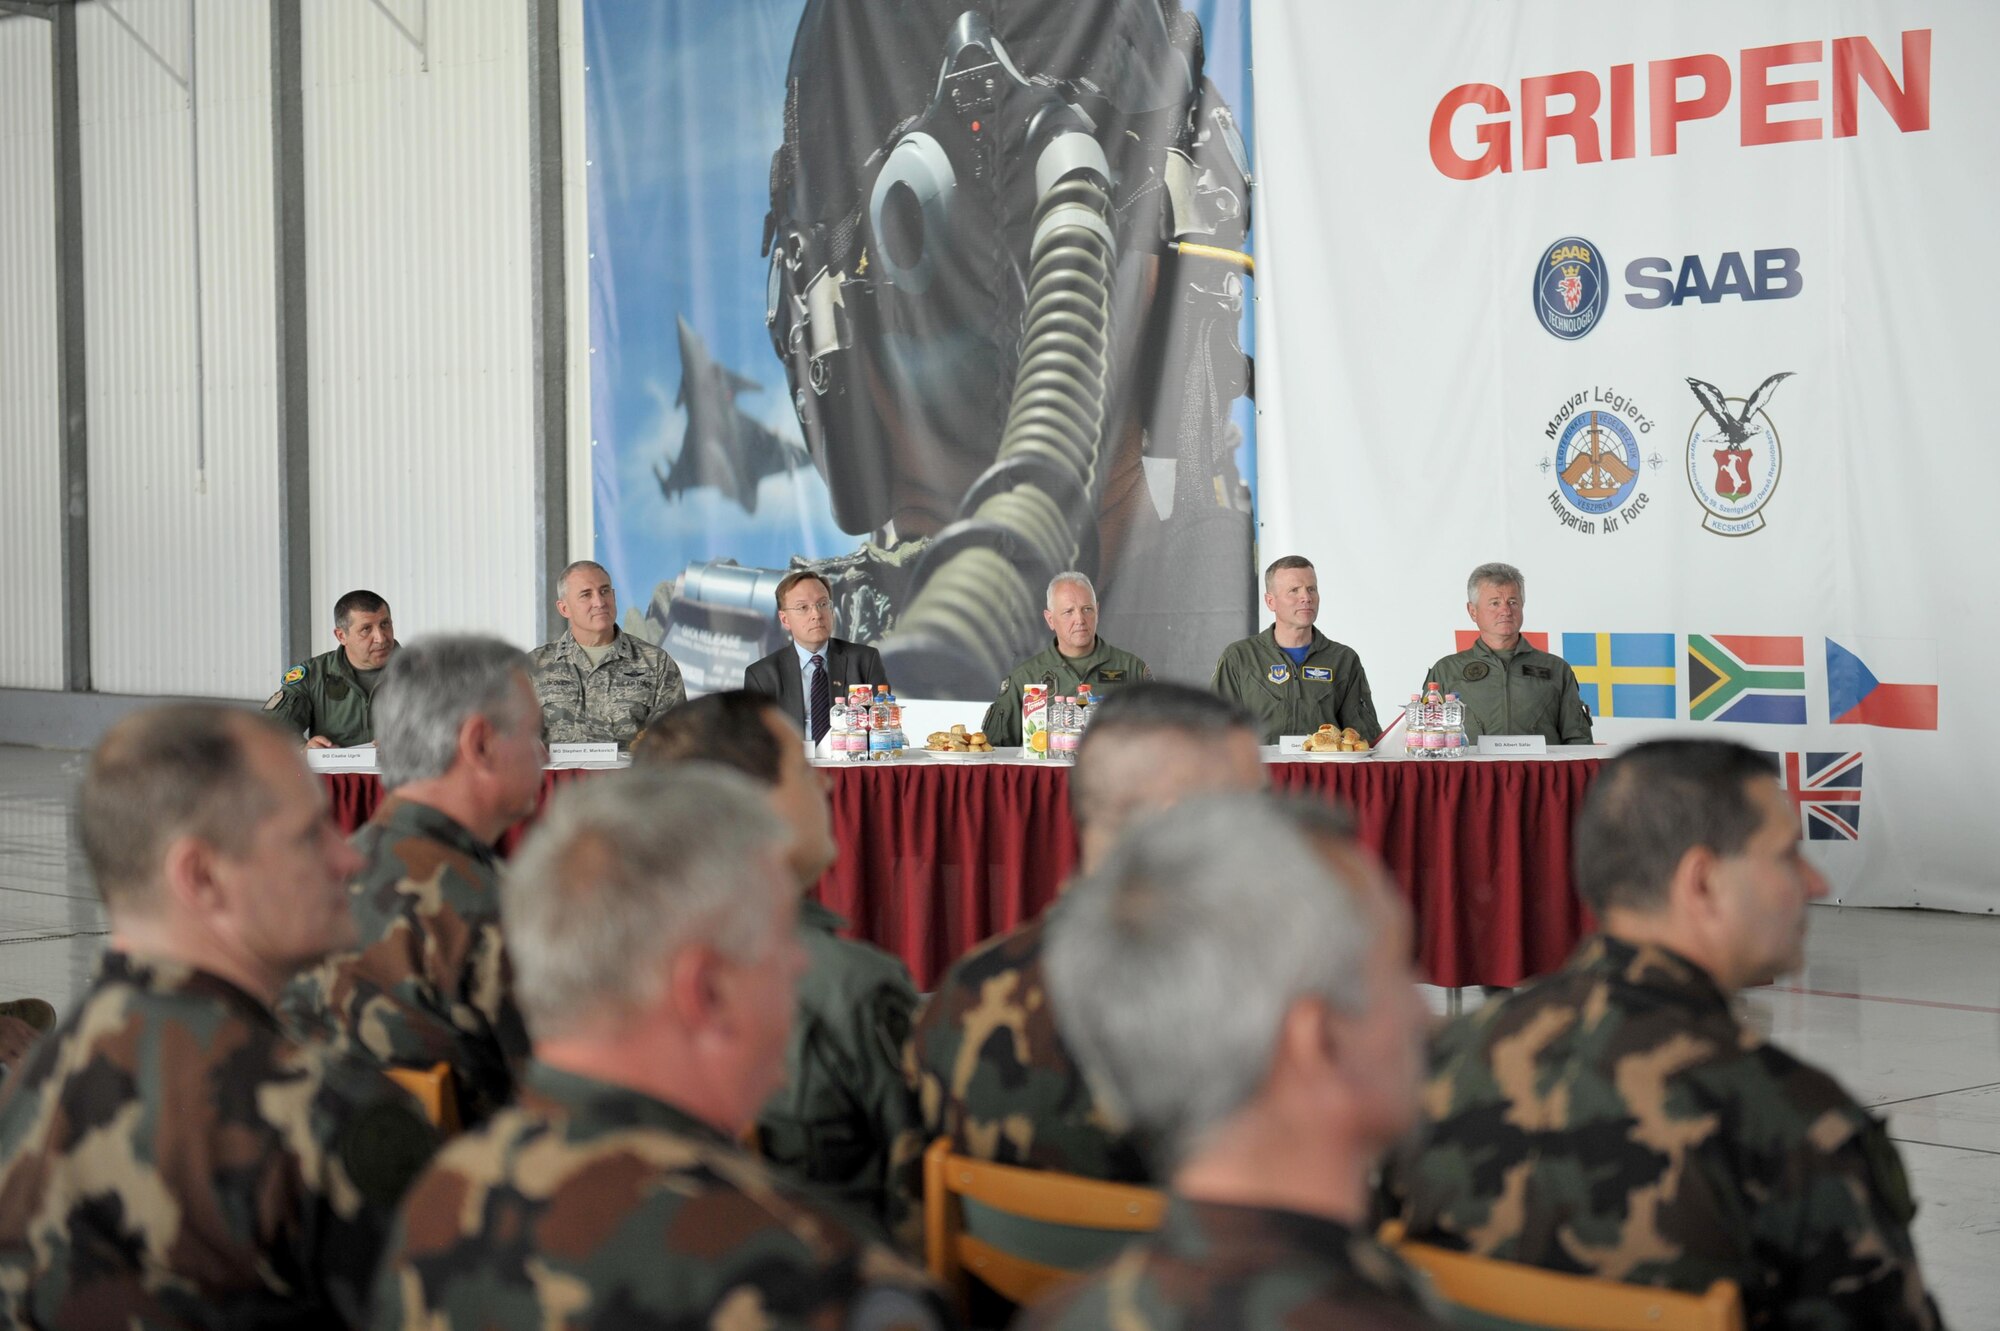 Brig. Gen. Csaba Ugrik, commander of 59th Air Base, Brig. Gen. Stephen Markovich, commander of the Ohio Air National Guard, Mr. David Kostelancik, chargé d’ affaires for the U.S. Embassy in Hungary, Gen. Tod Wolters, commander of the United States Air Forces in Europe and Air Forces Africa, Lt. Gen. Zoltan Orosz, PhD., deputy chief of defence for the Hungarian Defence Forces, and Brig. Gen. Albert Sáfár, chief of air forces for the Hungarian Defence Forces attended the Distinguished Visitor Day at the 59th Air Base in Kecskemét, Hungary, on June 2. Approximately 400 military members from the United States, Hungary, Croatia, Slovakia, Slovenia and Czech Republic, including 200 Airmen from the Ohio National Guard, are participating in the largest air-to-air and air-to-ground exercise in Hungary, focused on conducting military-to-military engagements, interoperability and maintaining joint readiness.